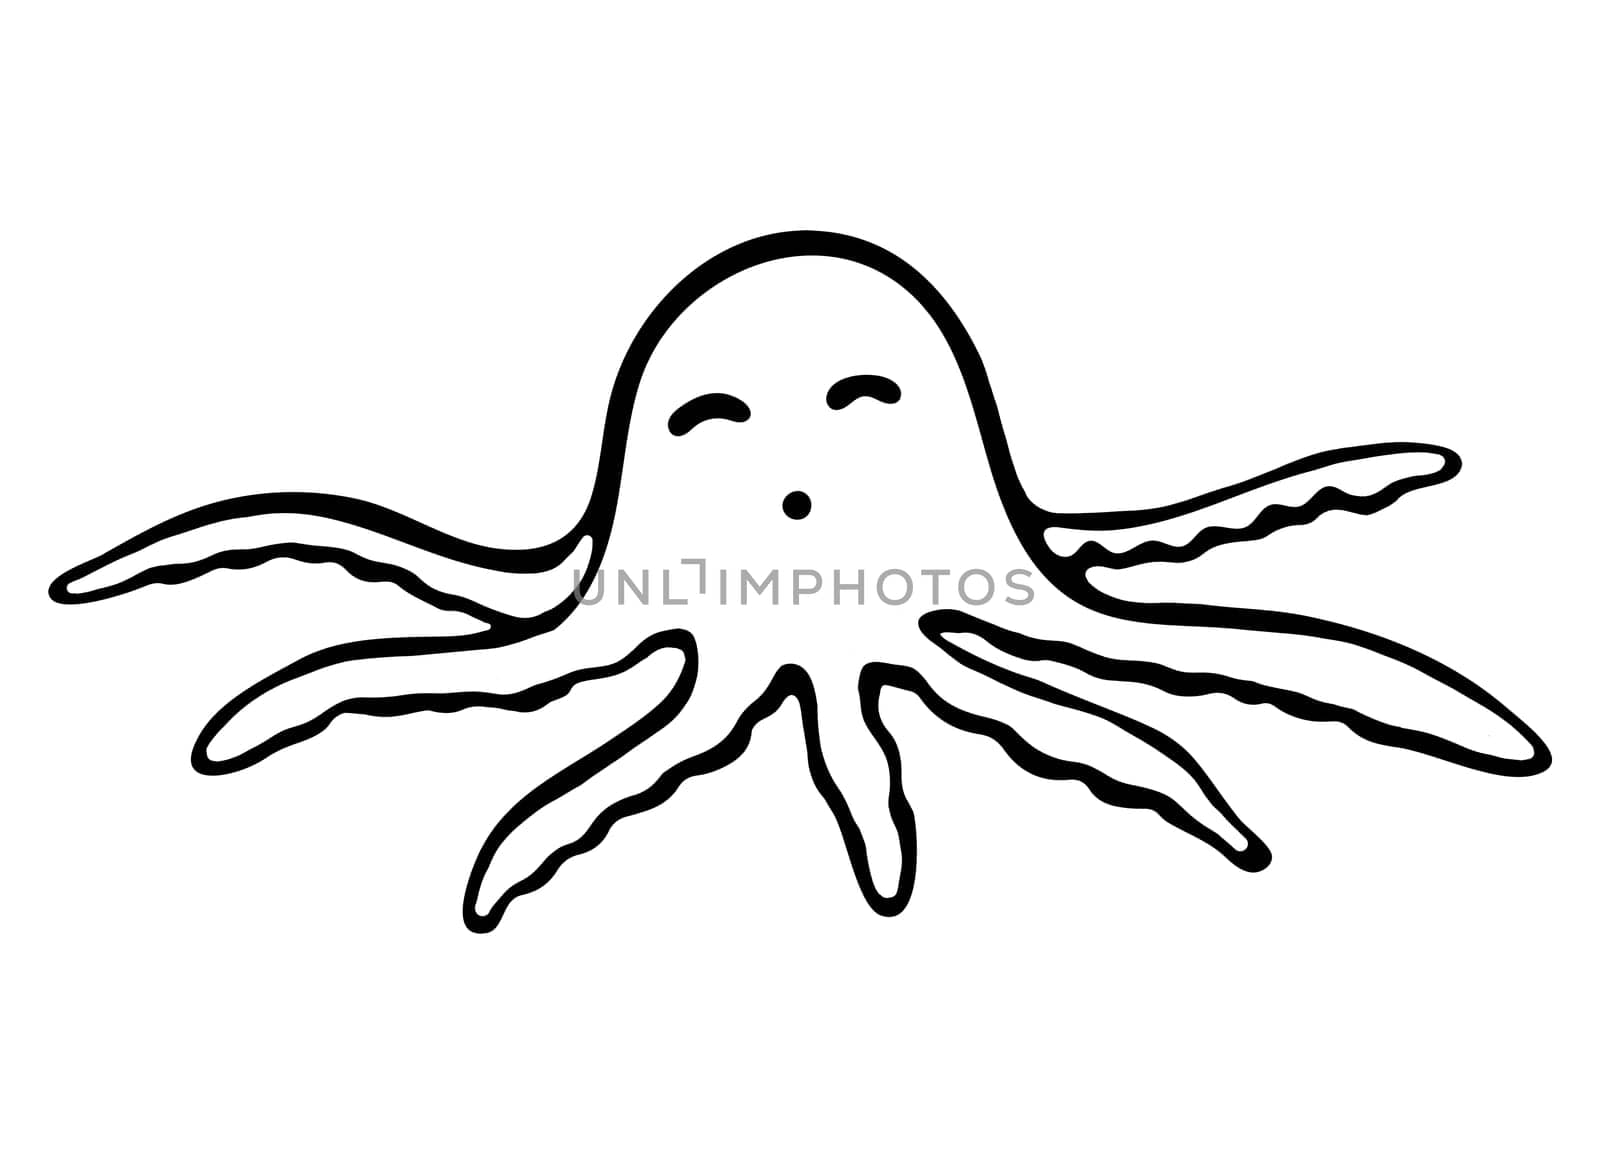 Black and White Octopus Icon Isolated on White Background. Hand Drawn Coloring book with Octopus Tentacles Clipart. Coloring Page for Kids.